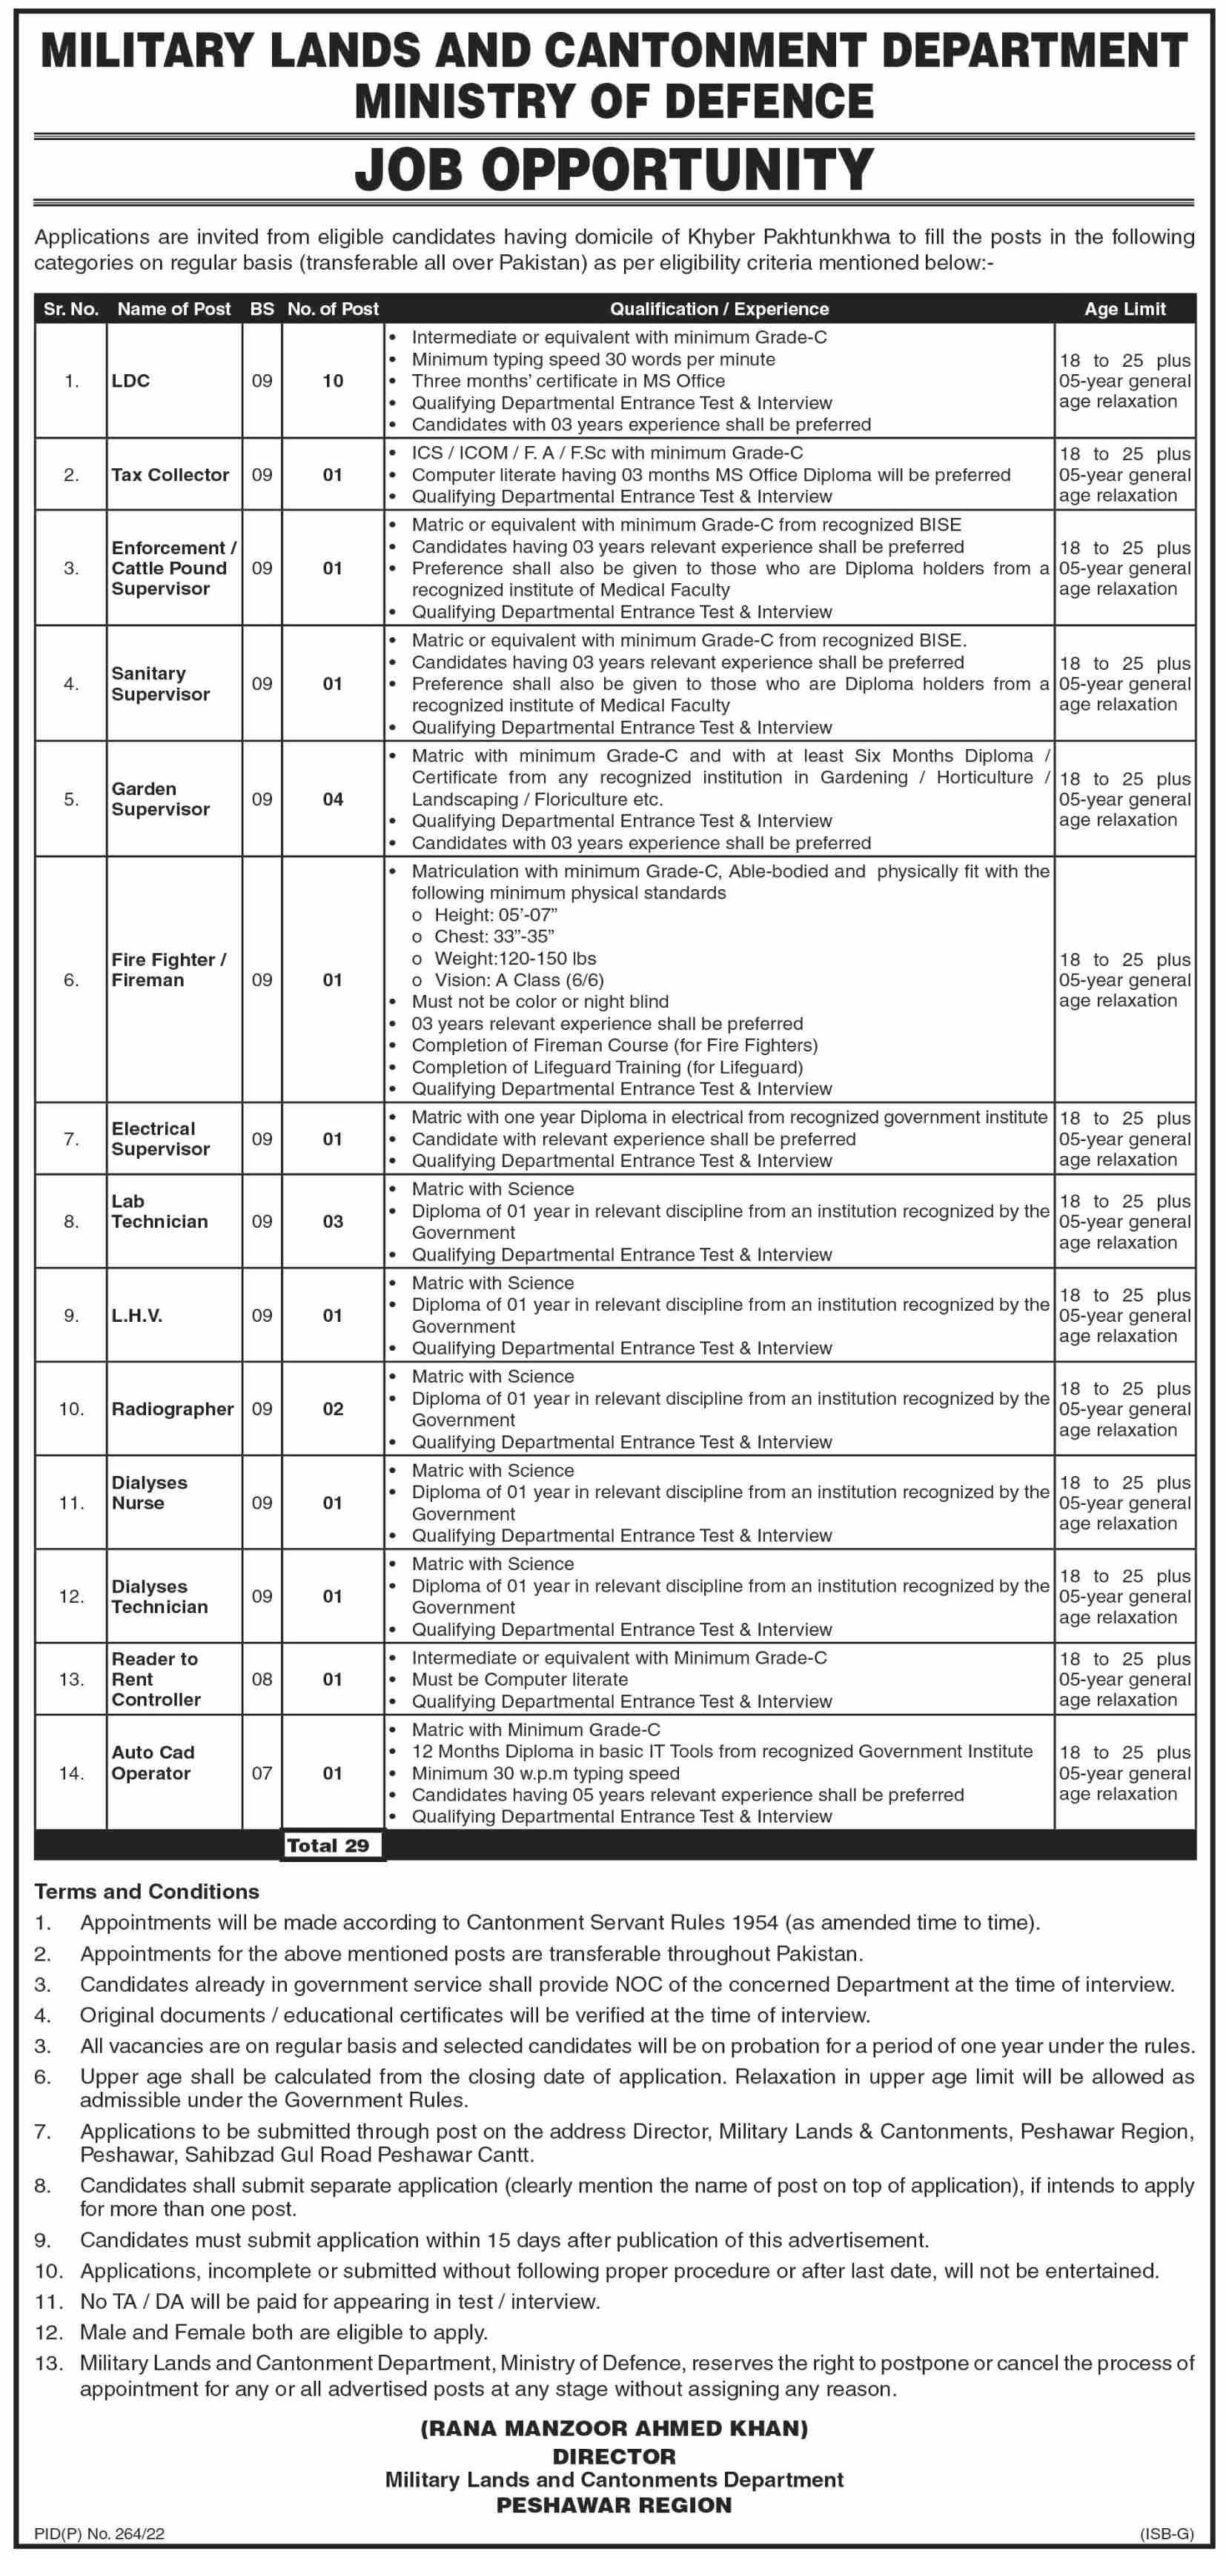 Military Lands & Cantonment Department Jobs